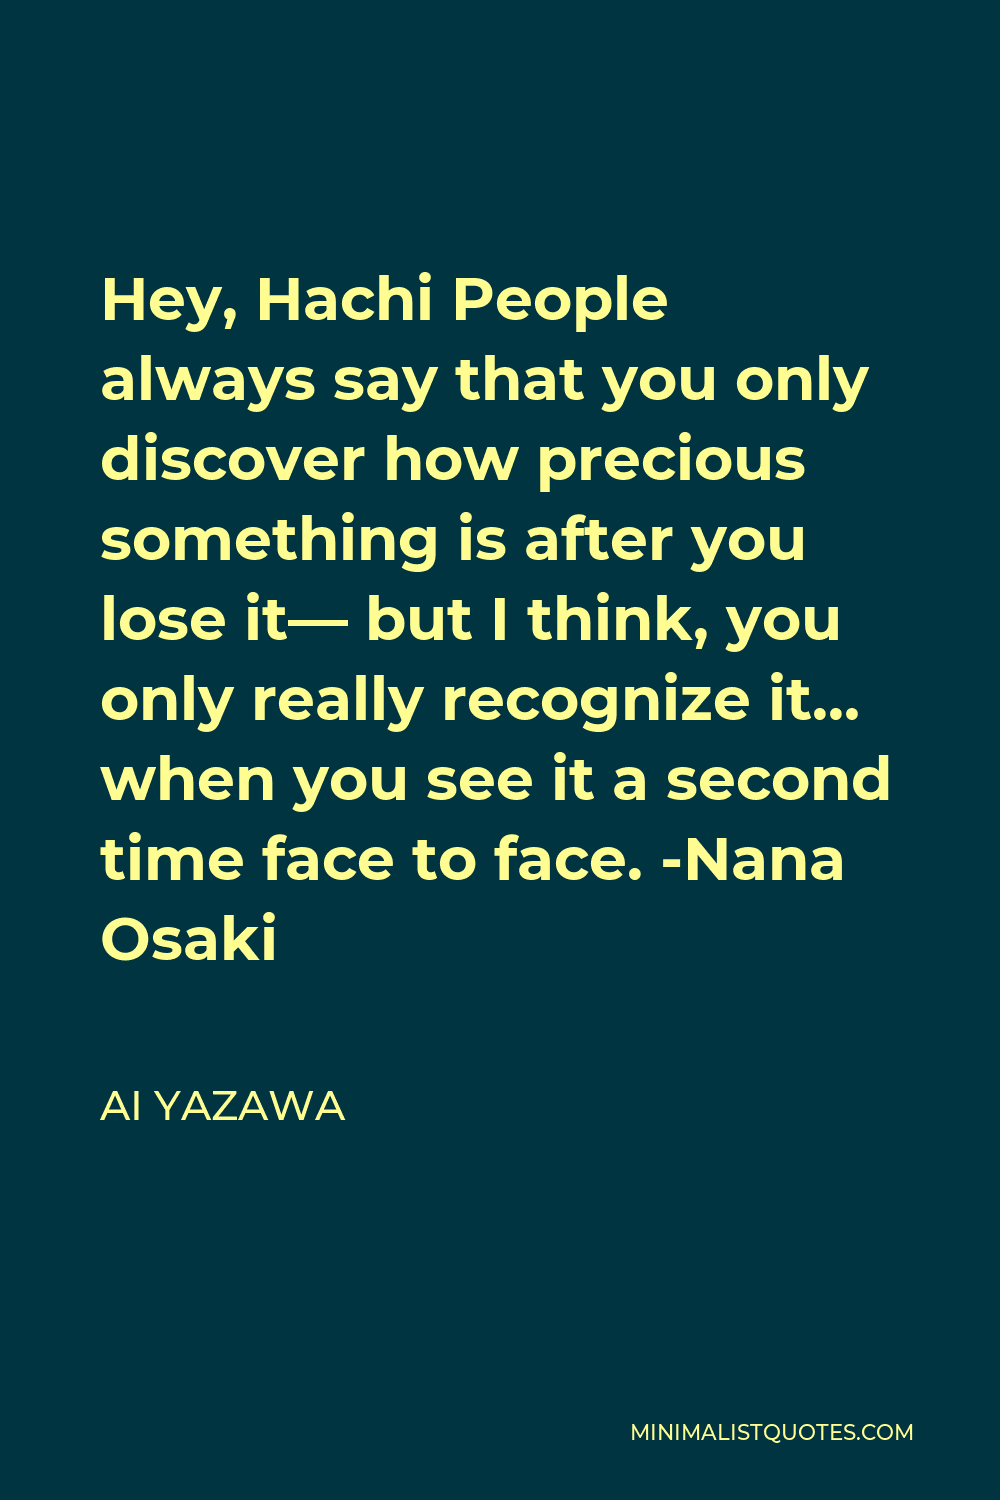 Ai Yazawa Quote - Hey, Hachi People always say that you only discover how precious something is after you lose it— but I think, you only really recognize it… when you see it a second time face to face. -Nana Osaki